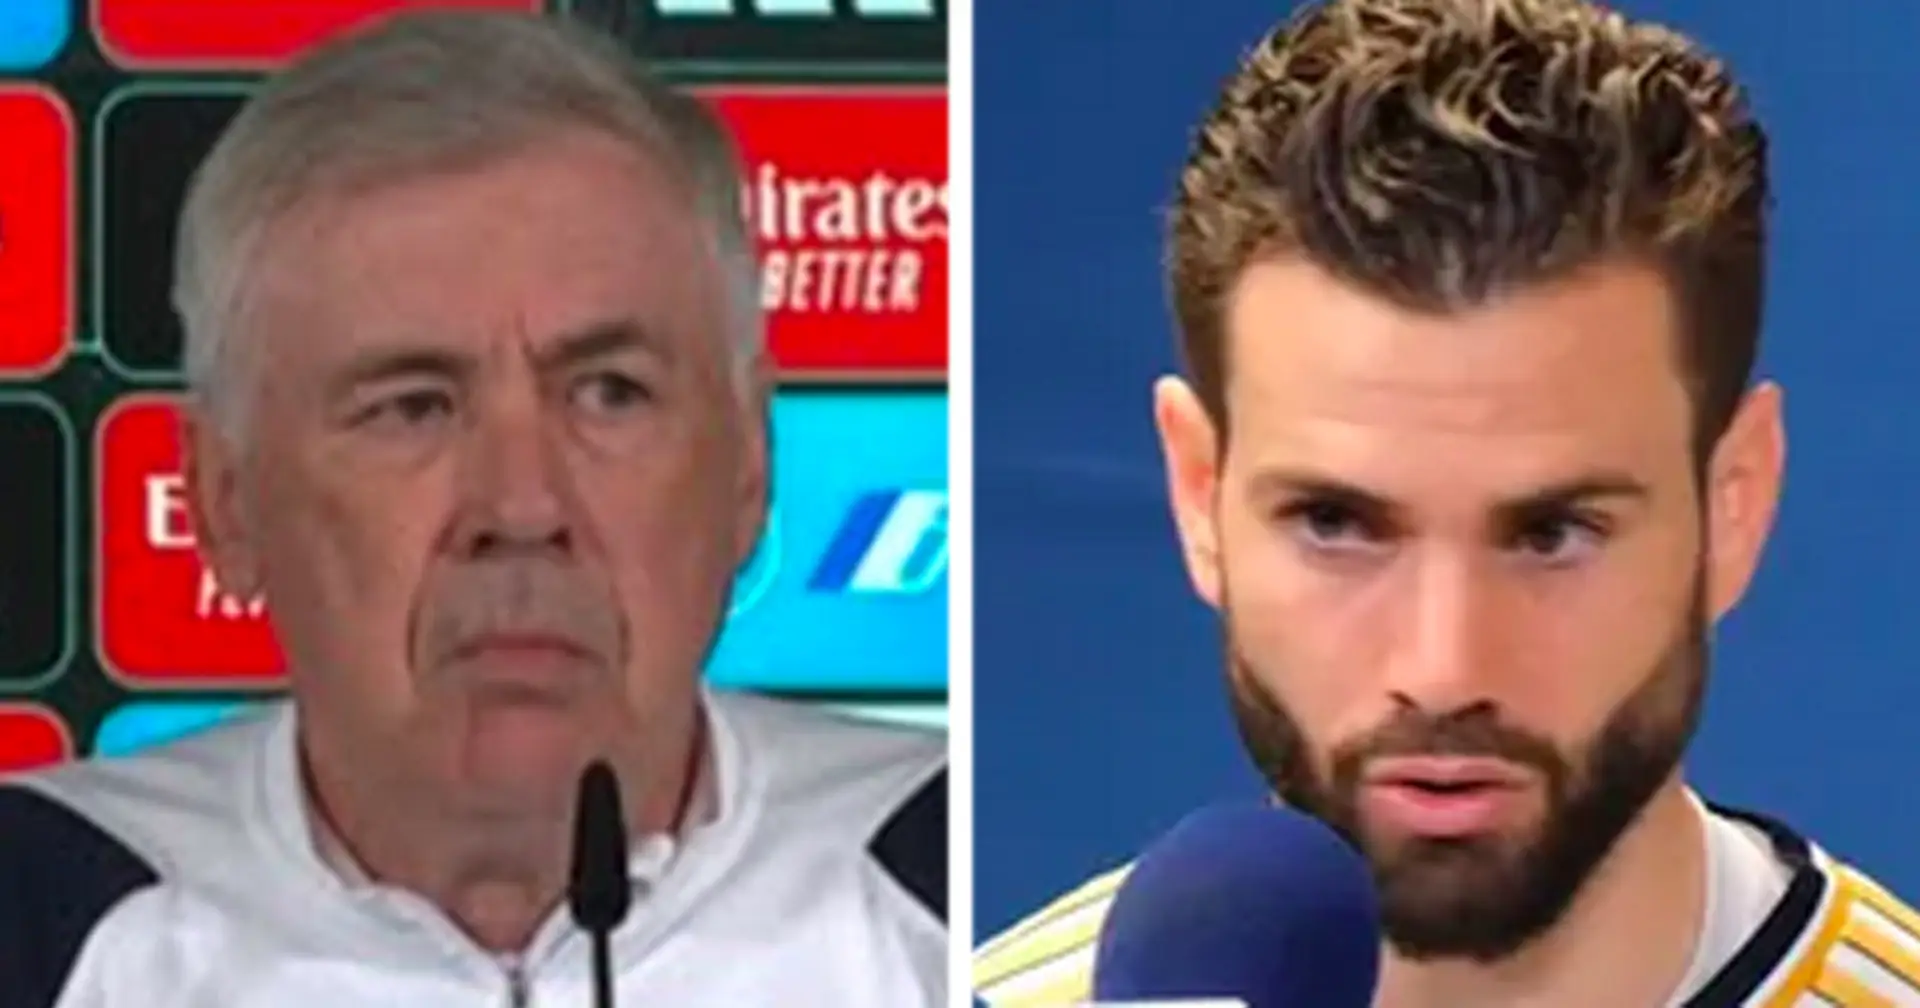 'That's how you can make a lot of mistakes': Ancelotti explains Nacho situation